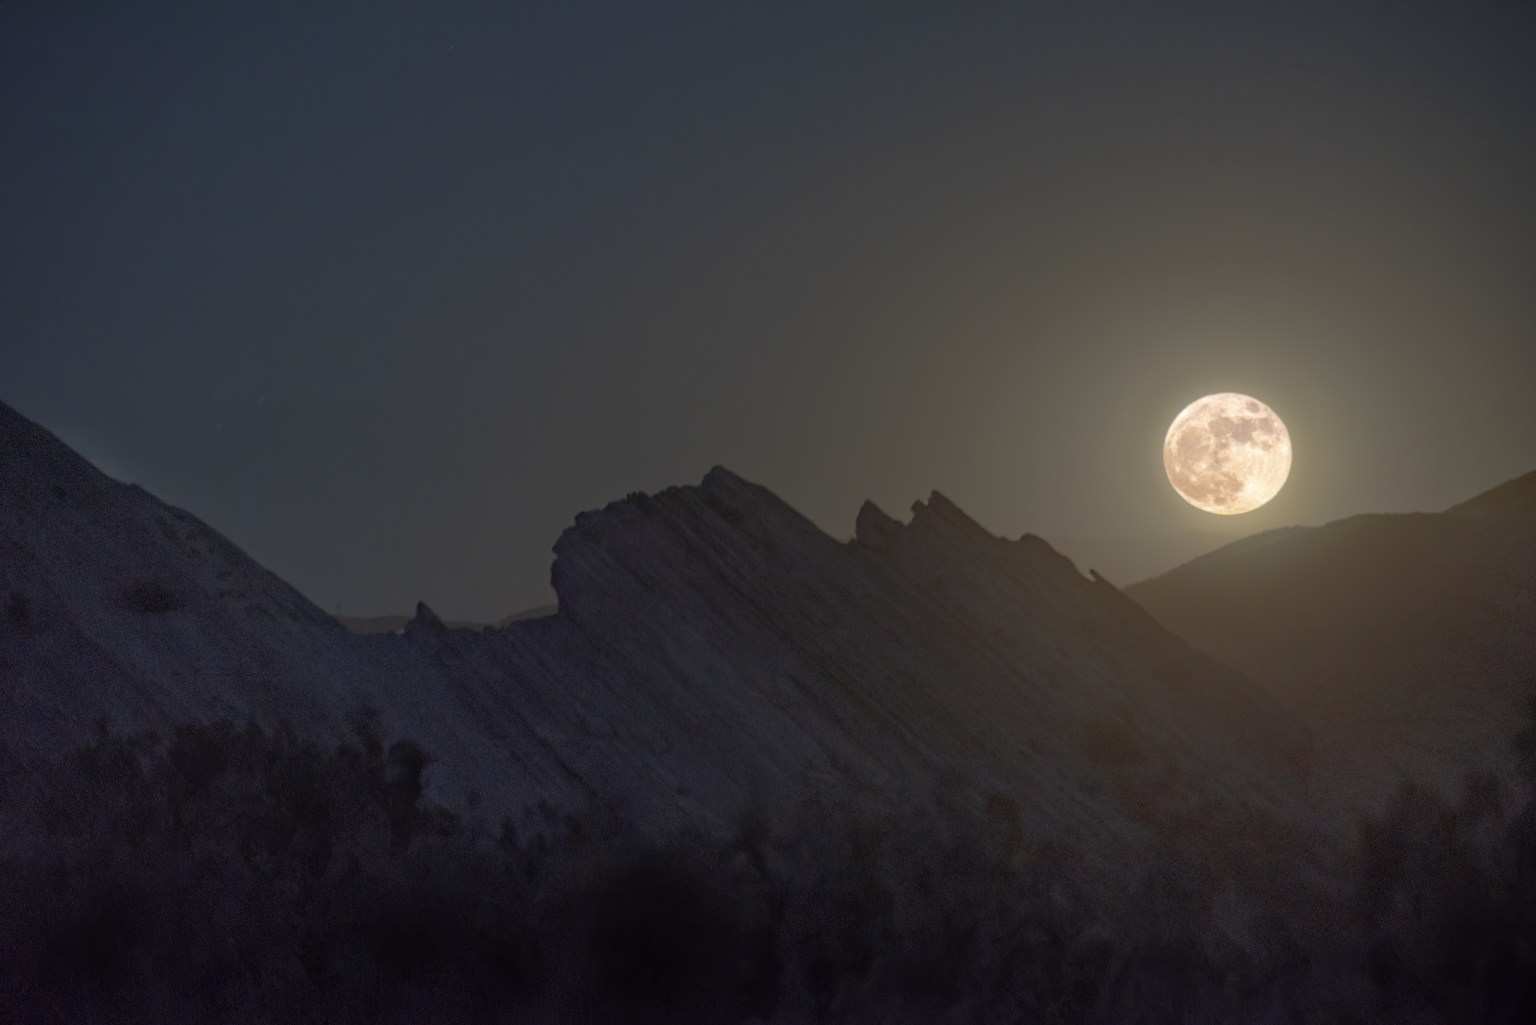 The Moon rises above a jumbled collection of giant rocks.